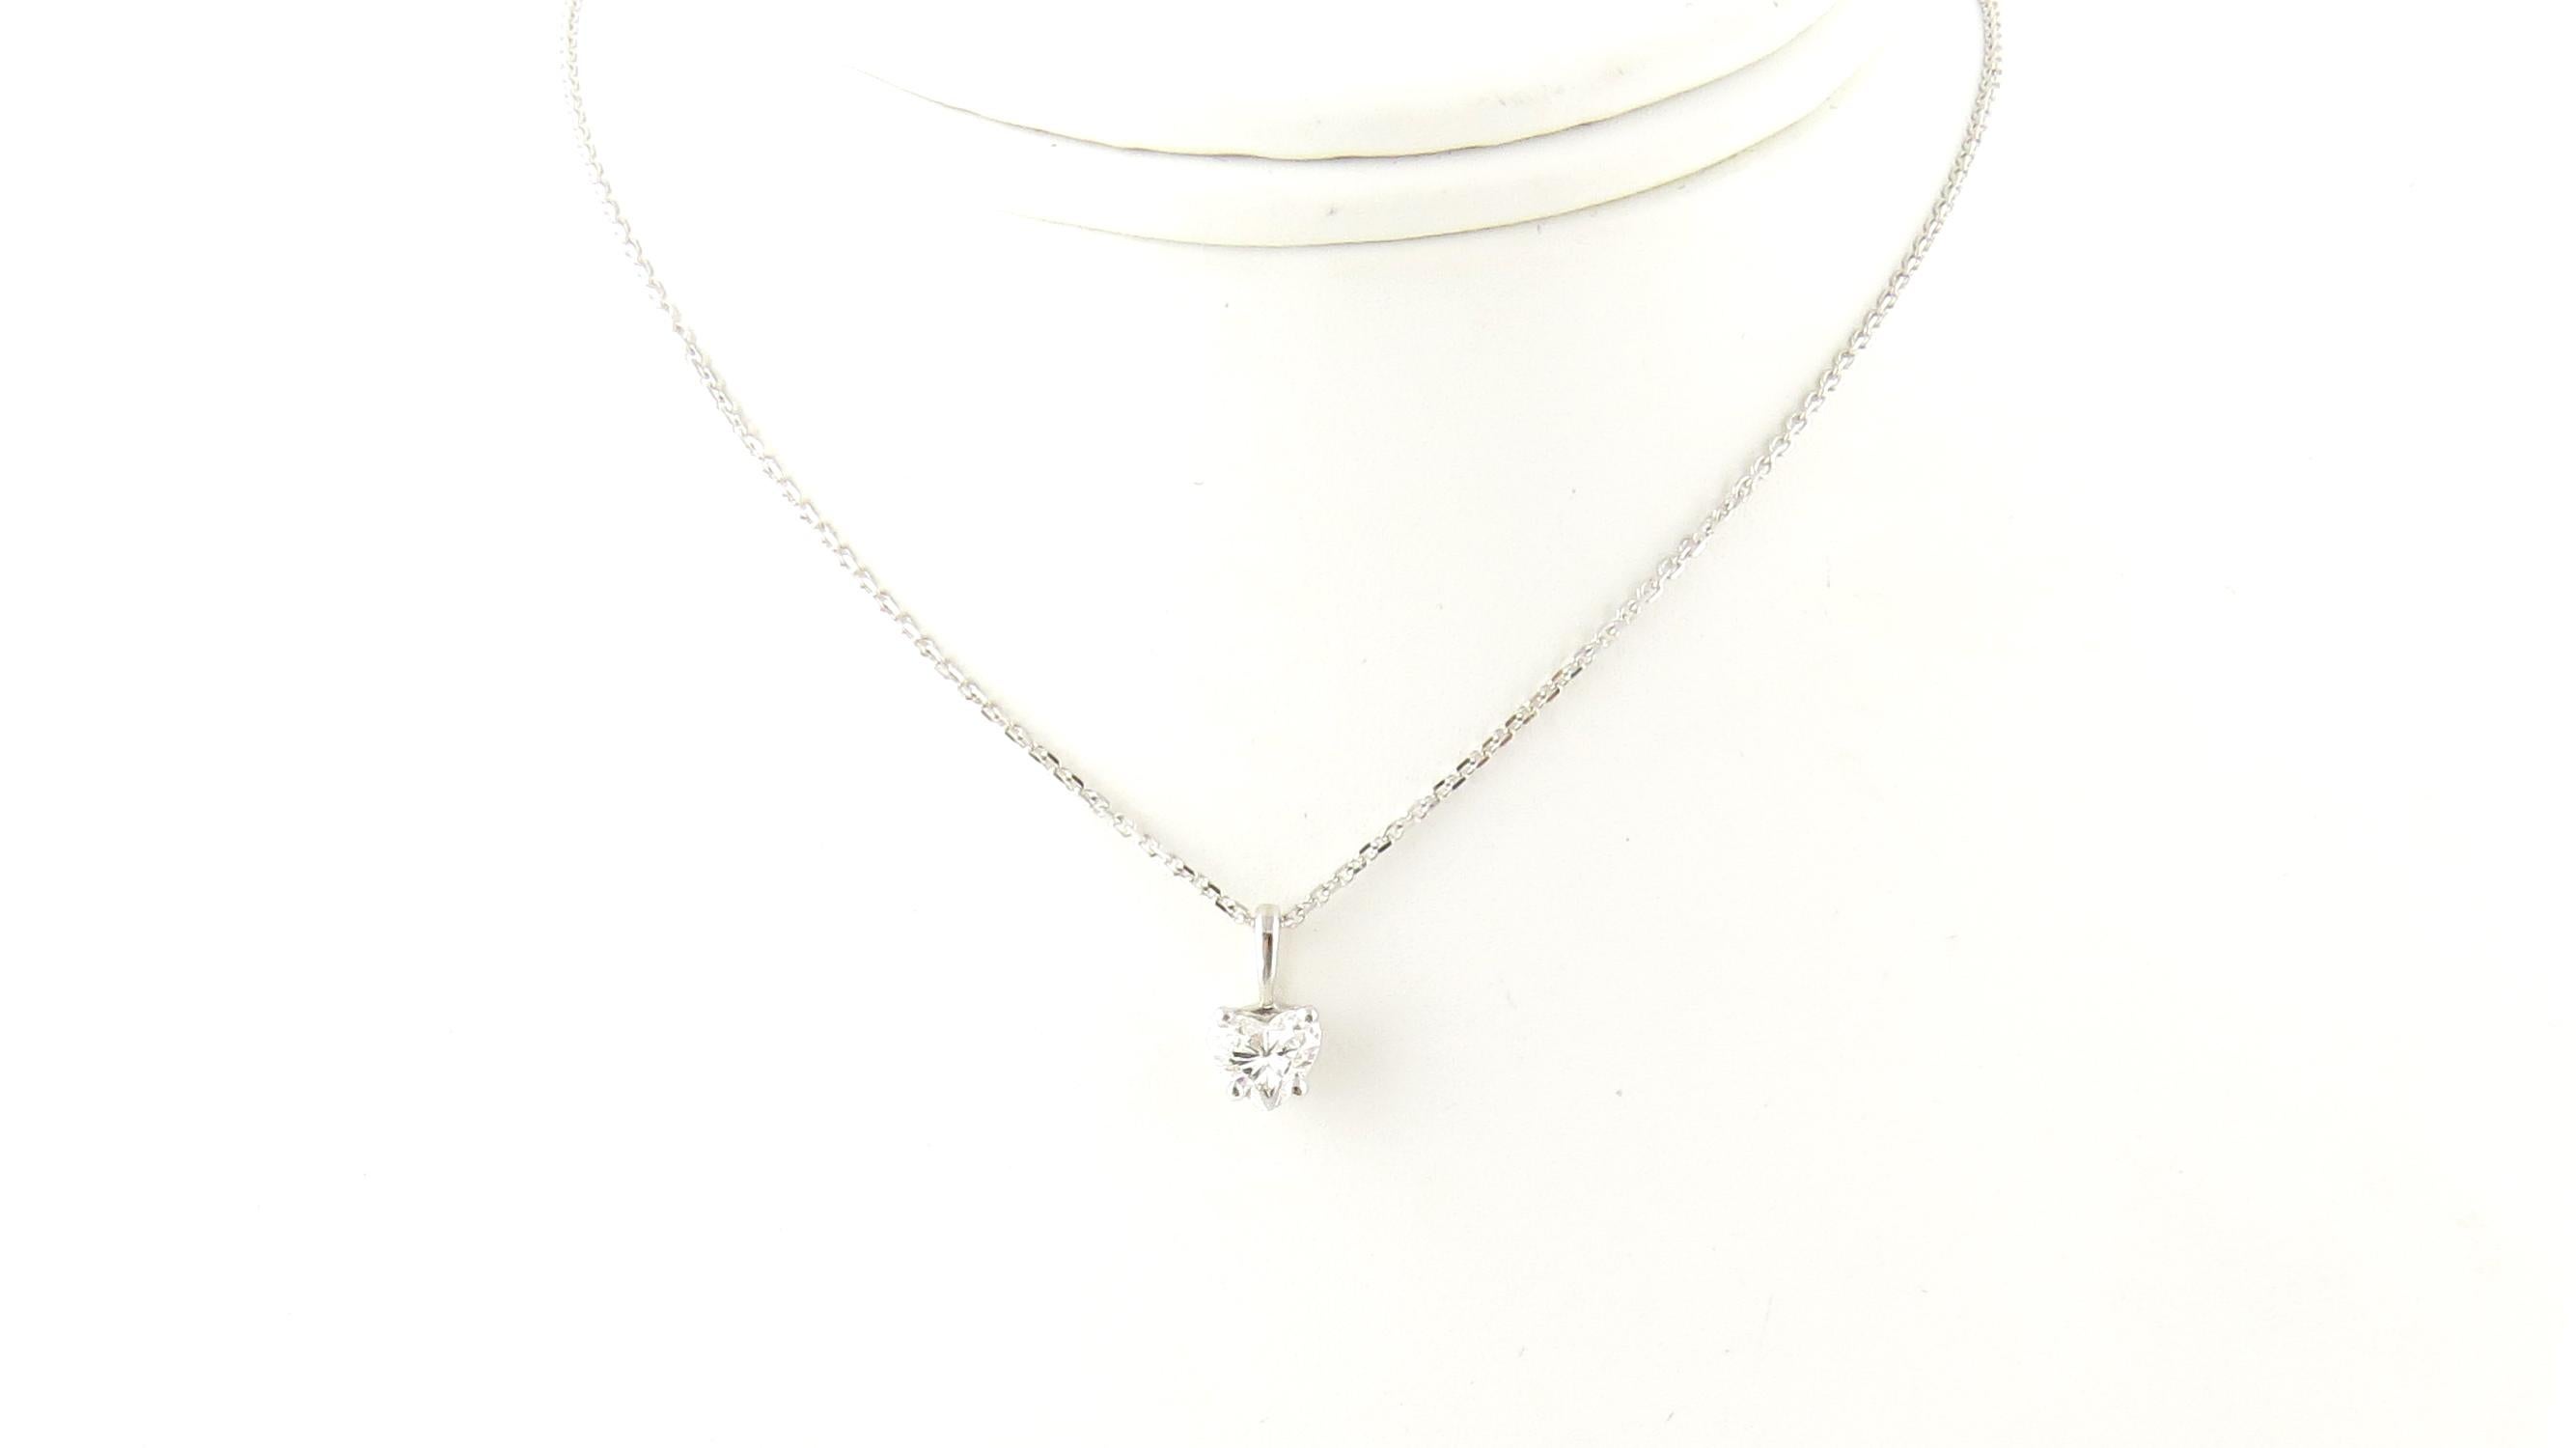 Vintage 14 Karat White Gold Heart Diamond Pendant Necklace

This stunning pendant features one heart shaped diamond (.46 ct.) suspended from a classic 14K white gold necklace.

Approximate total diamond weight: .46 ct.

Diamond clarity: SI2

Diamond